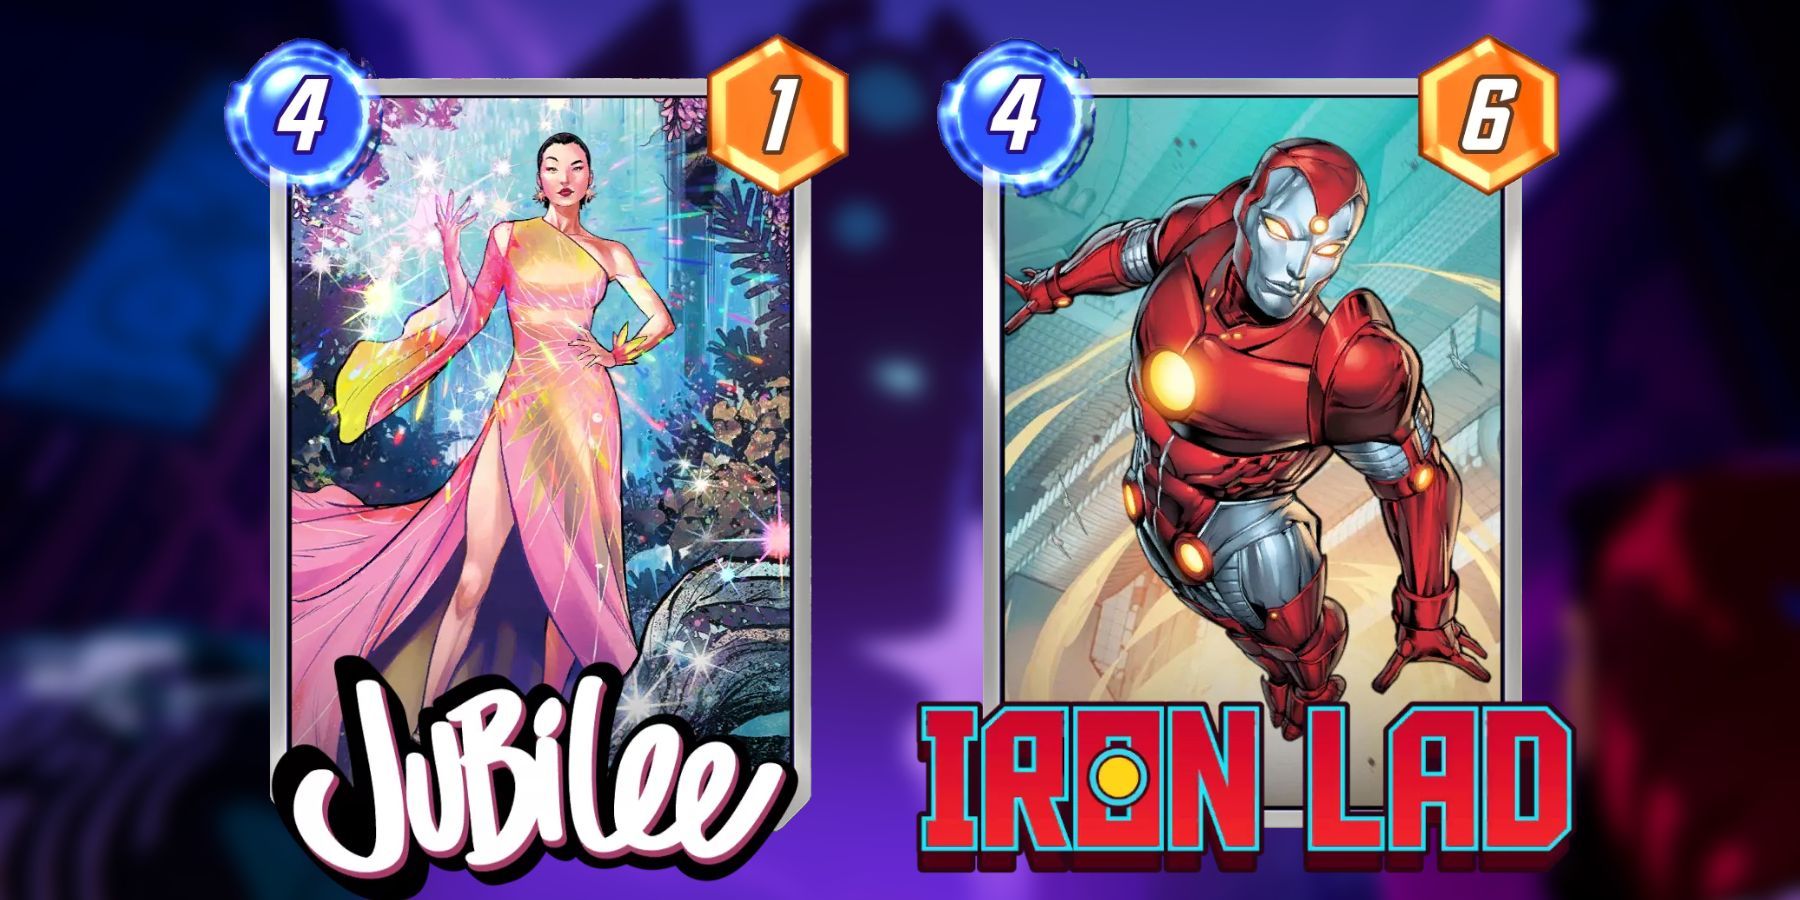 image showing jubilee and iron lad best cards for howard the duck deck in marvel snap.